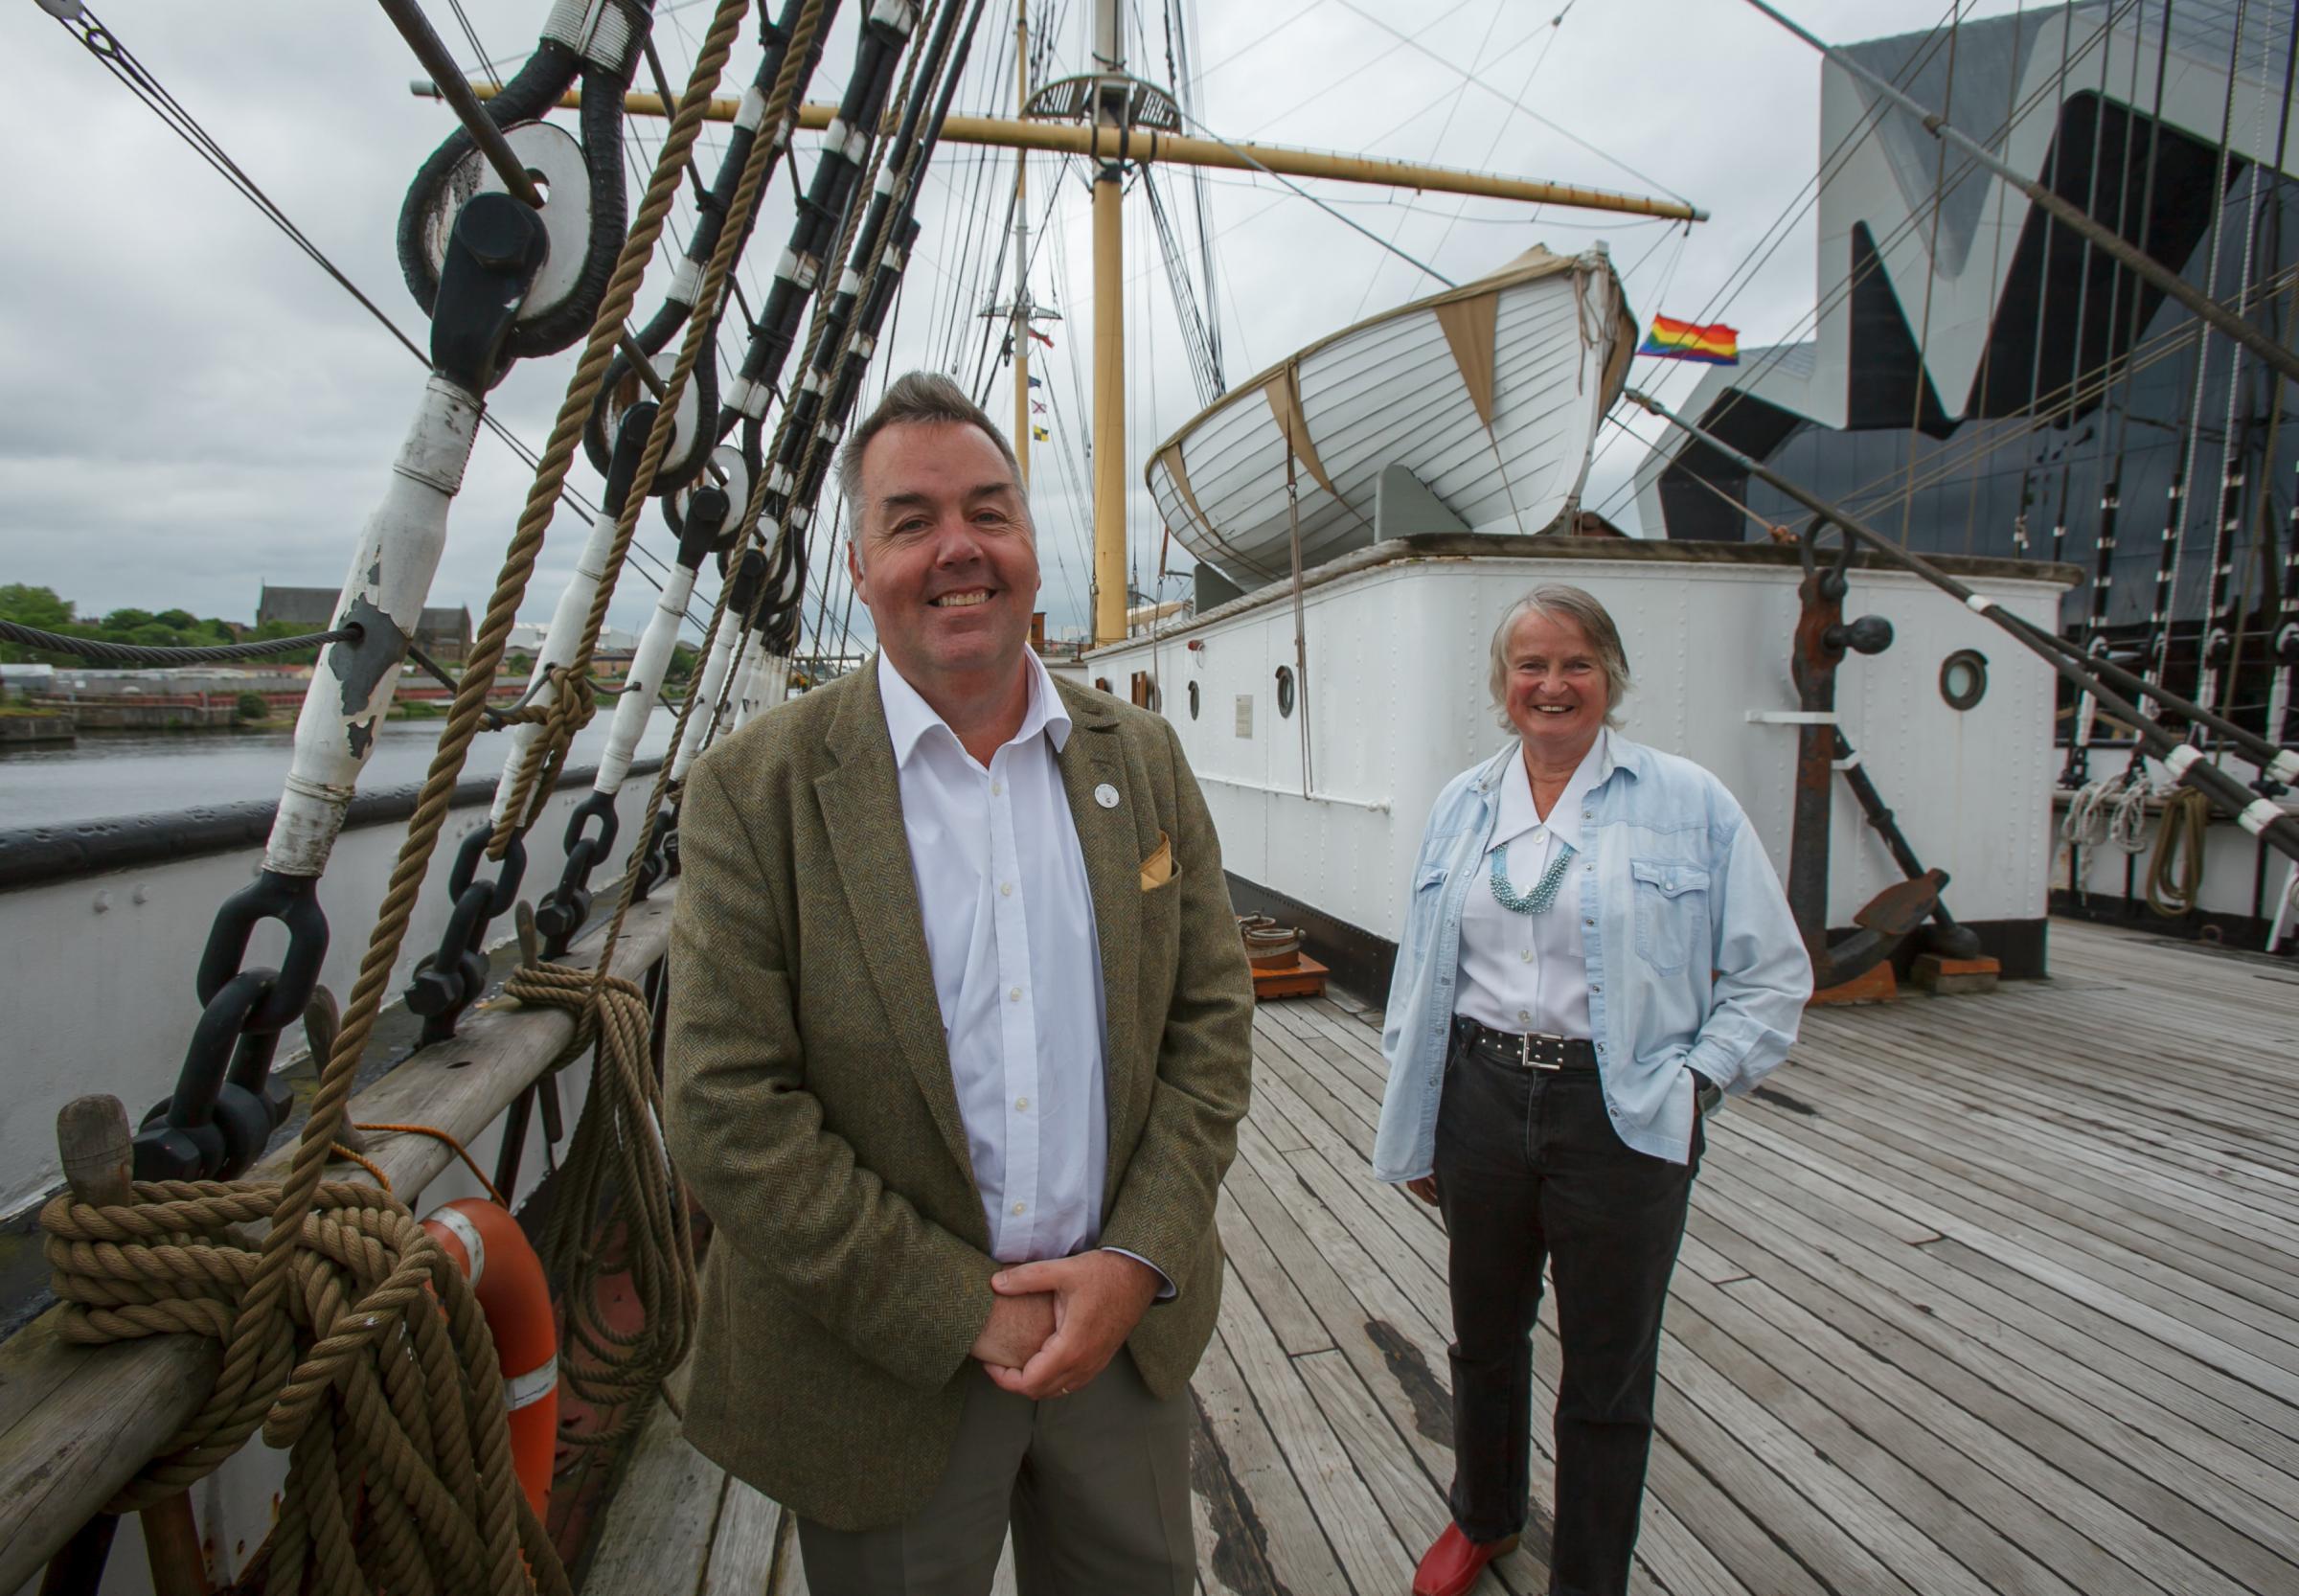 Glasgow's tall ship Glenlee in battle to secure future as she marks 125th year